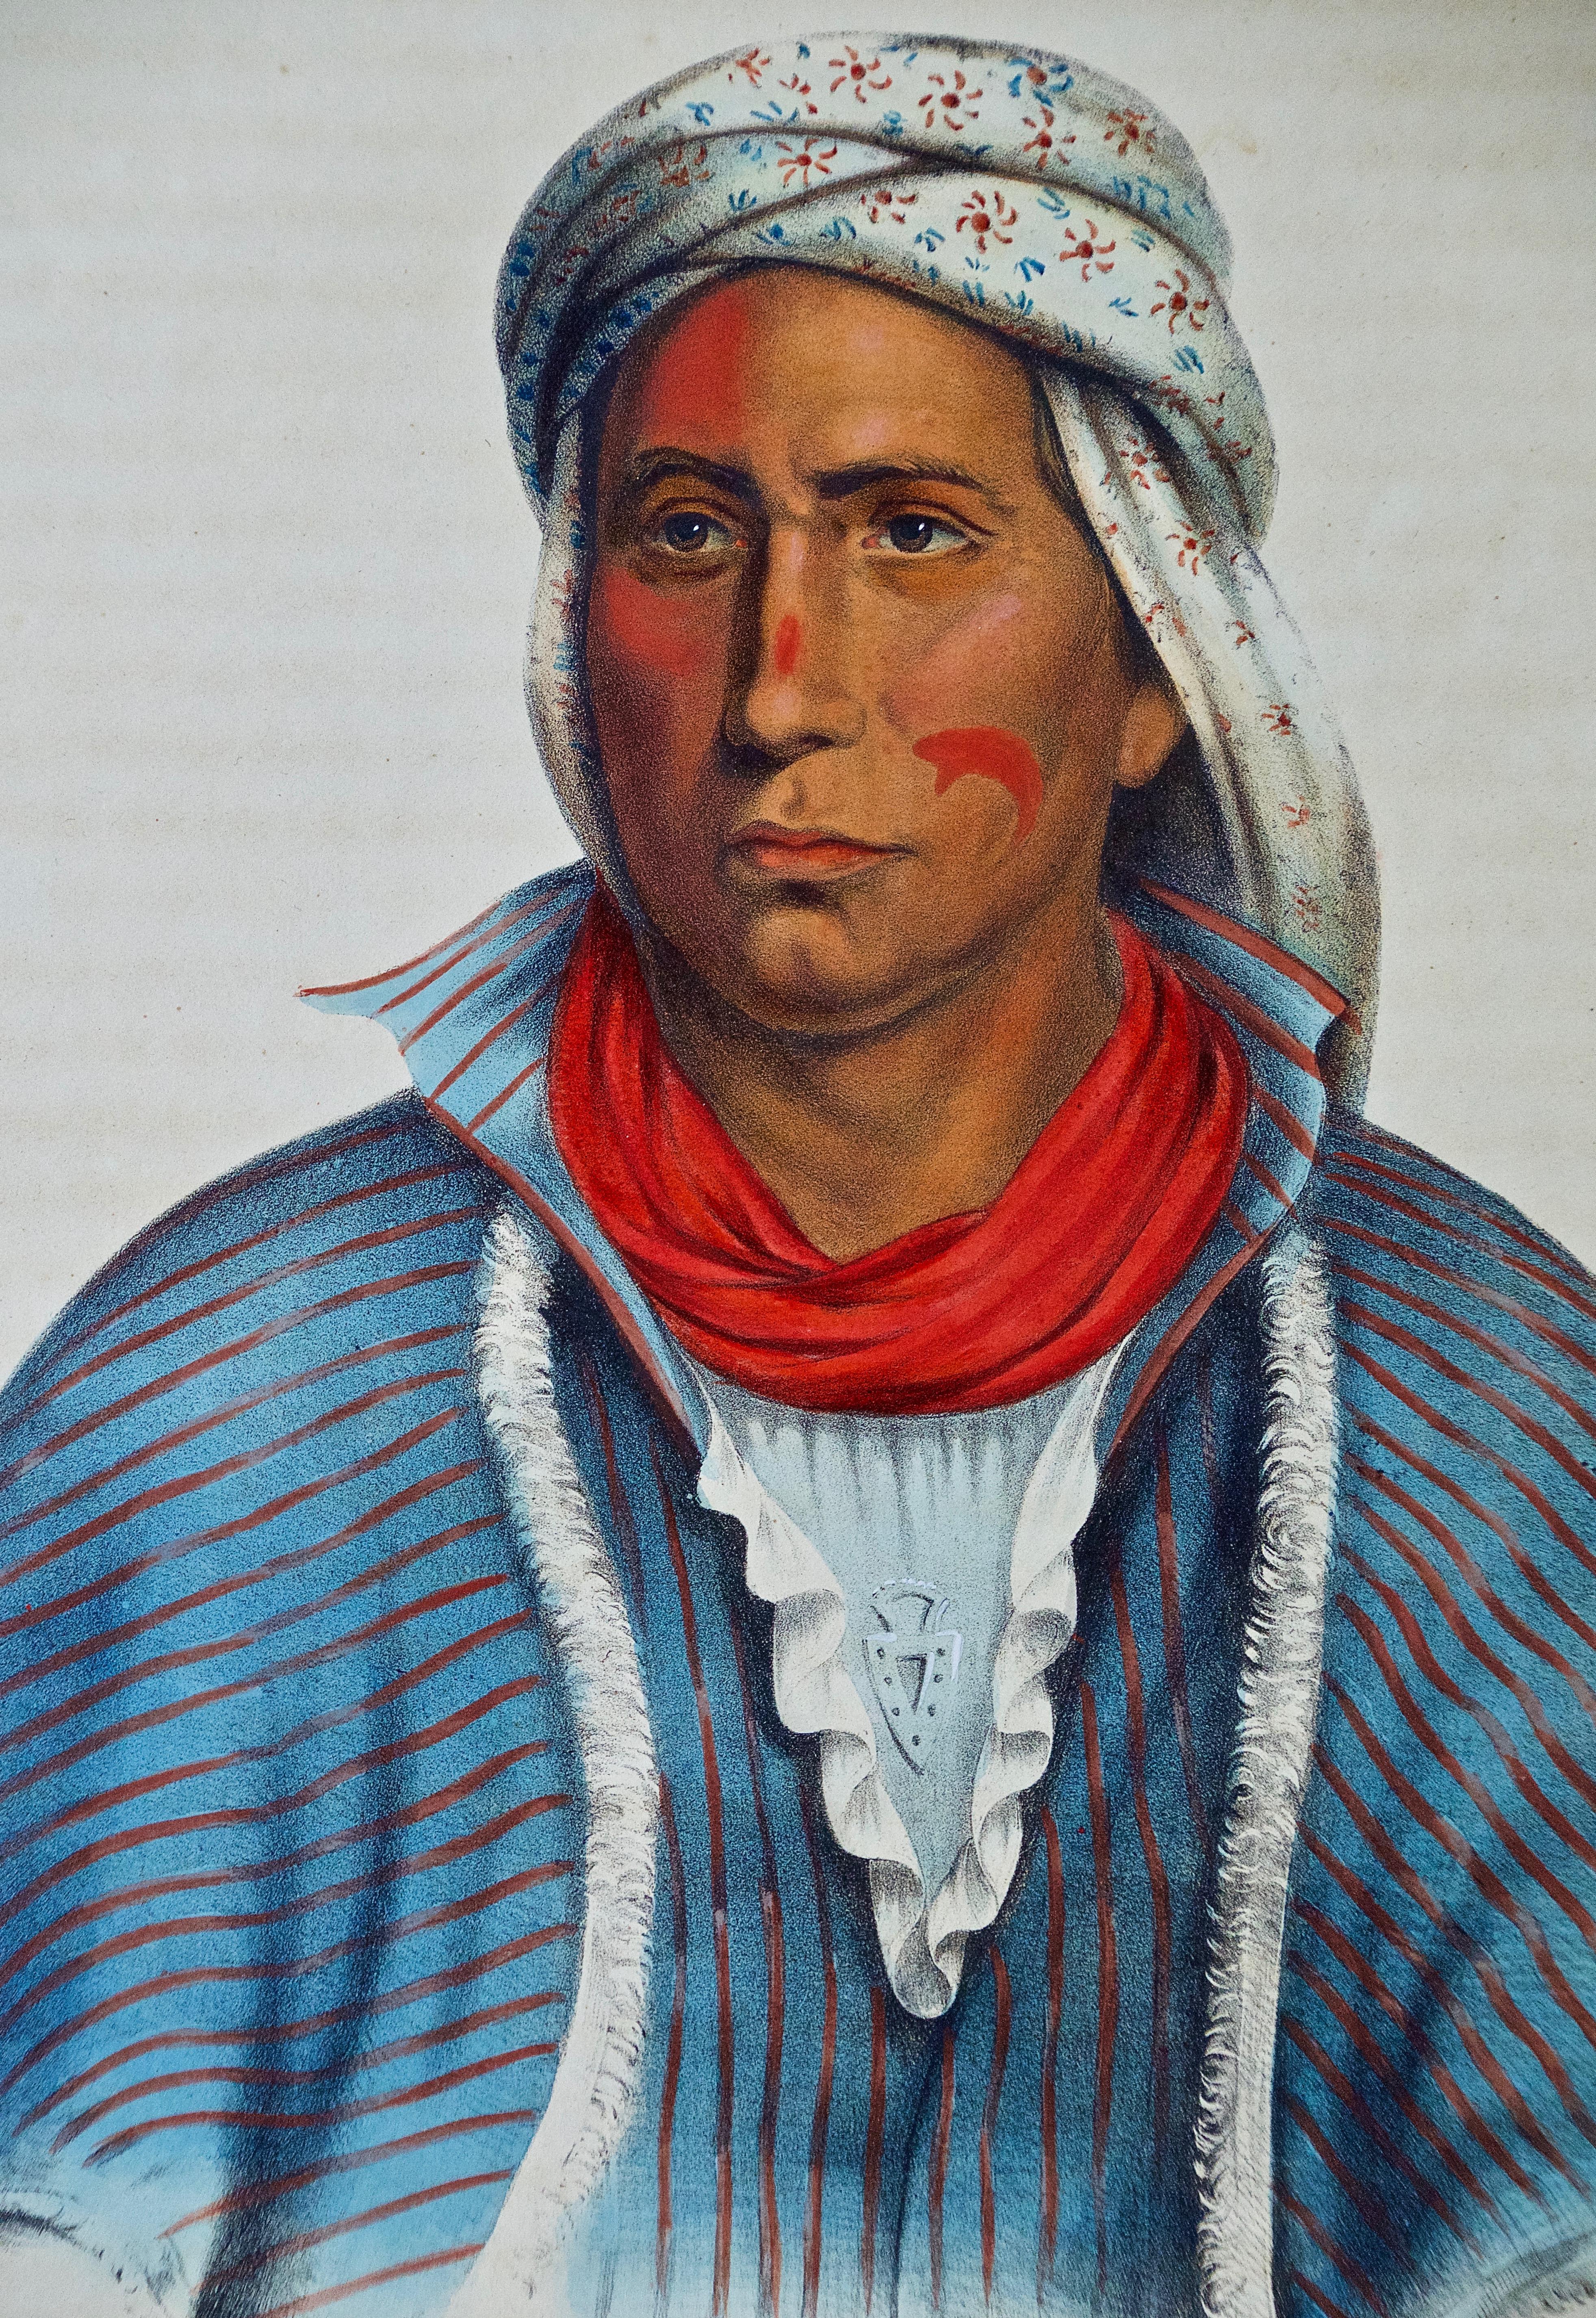 This an original 19th century hand-colored folio-size McKenney and Hall engraving of a Native American entitled 